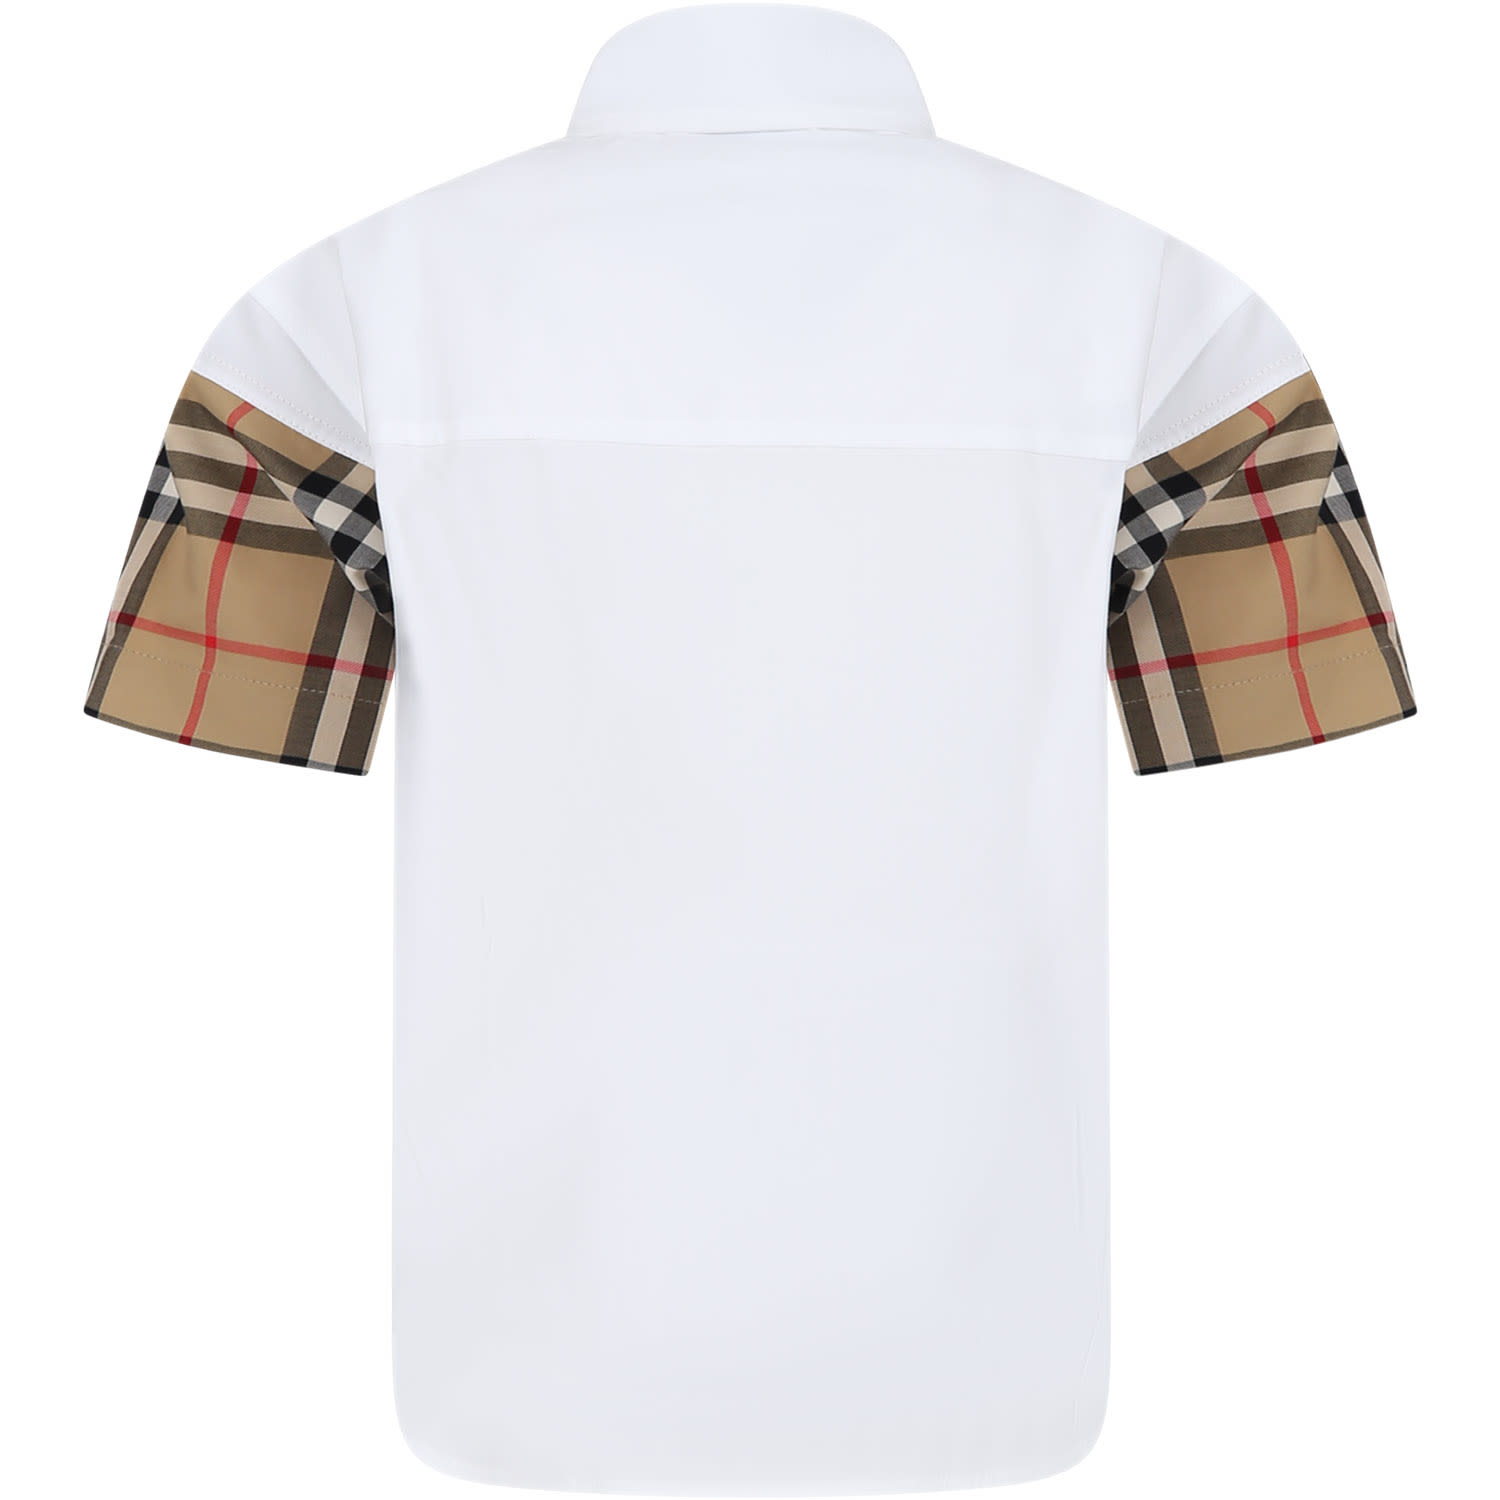 Shop Burberry White Shirt For Boy With Iconic Vintage Check